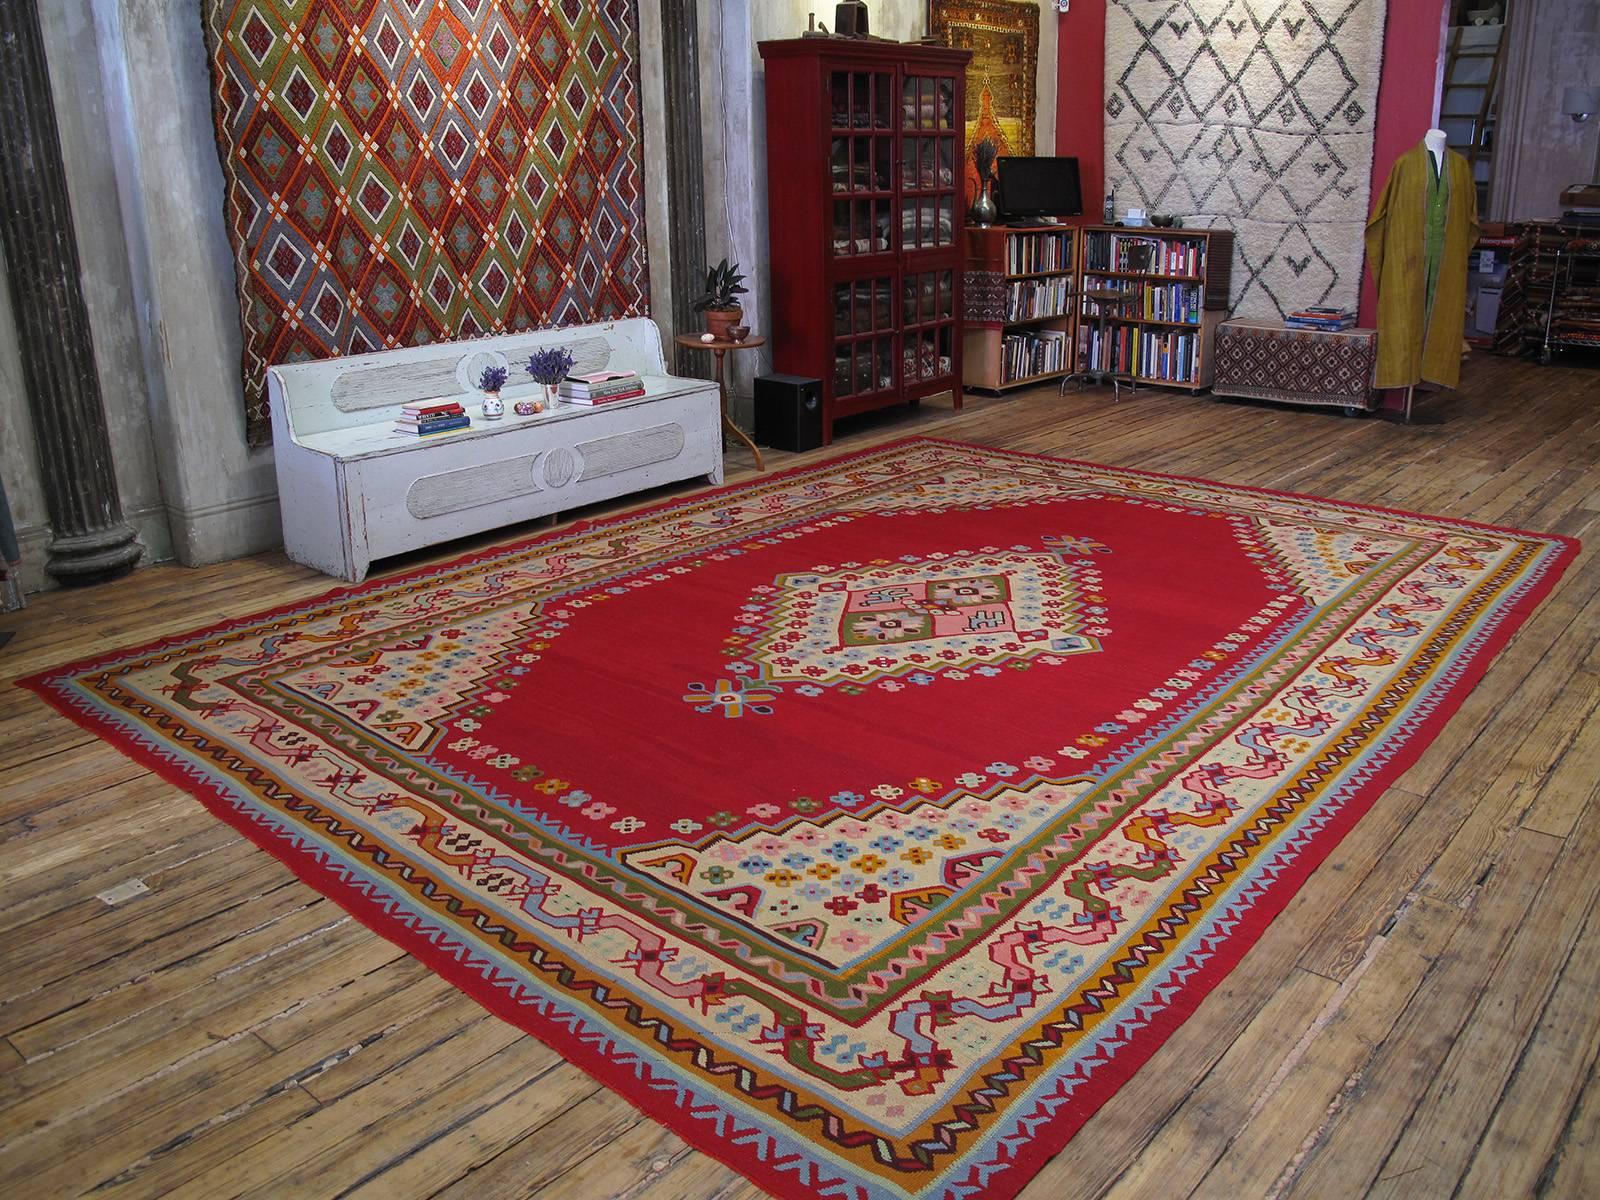 Fantastic Antique Oushak Kilim rug. An impressive antique Turkish Kilim rug of large size, woven in the Oushak region of Western Turkey. In near perfect state of preservation with brilliant colors, this Kilim is contemporary with the many antique